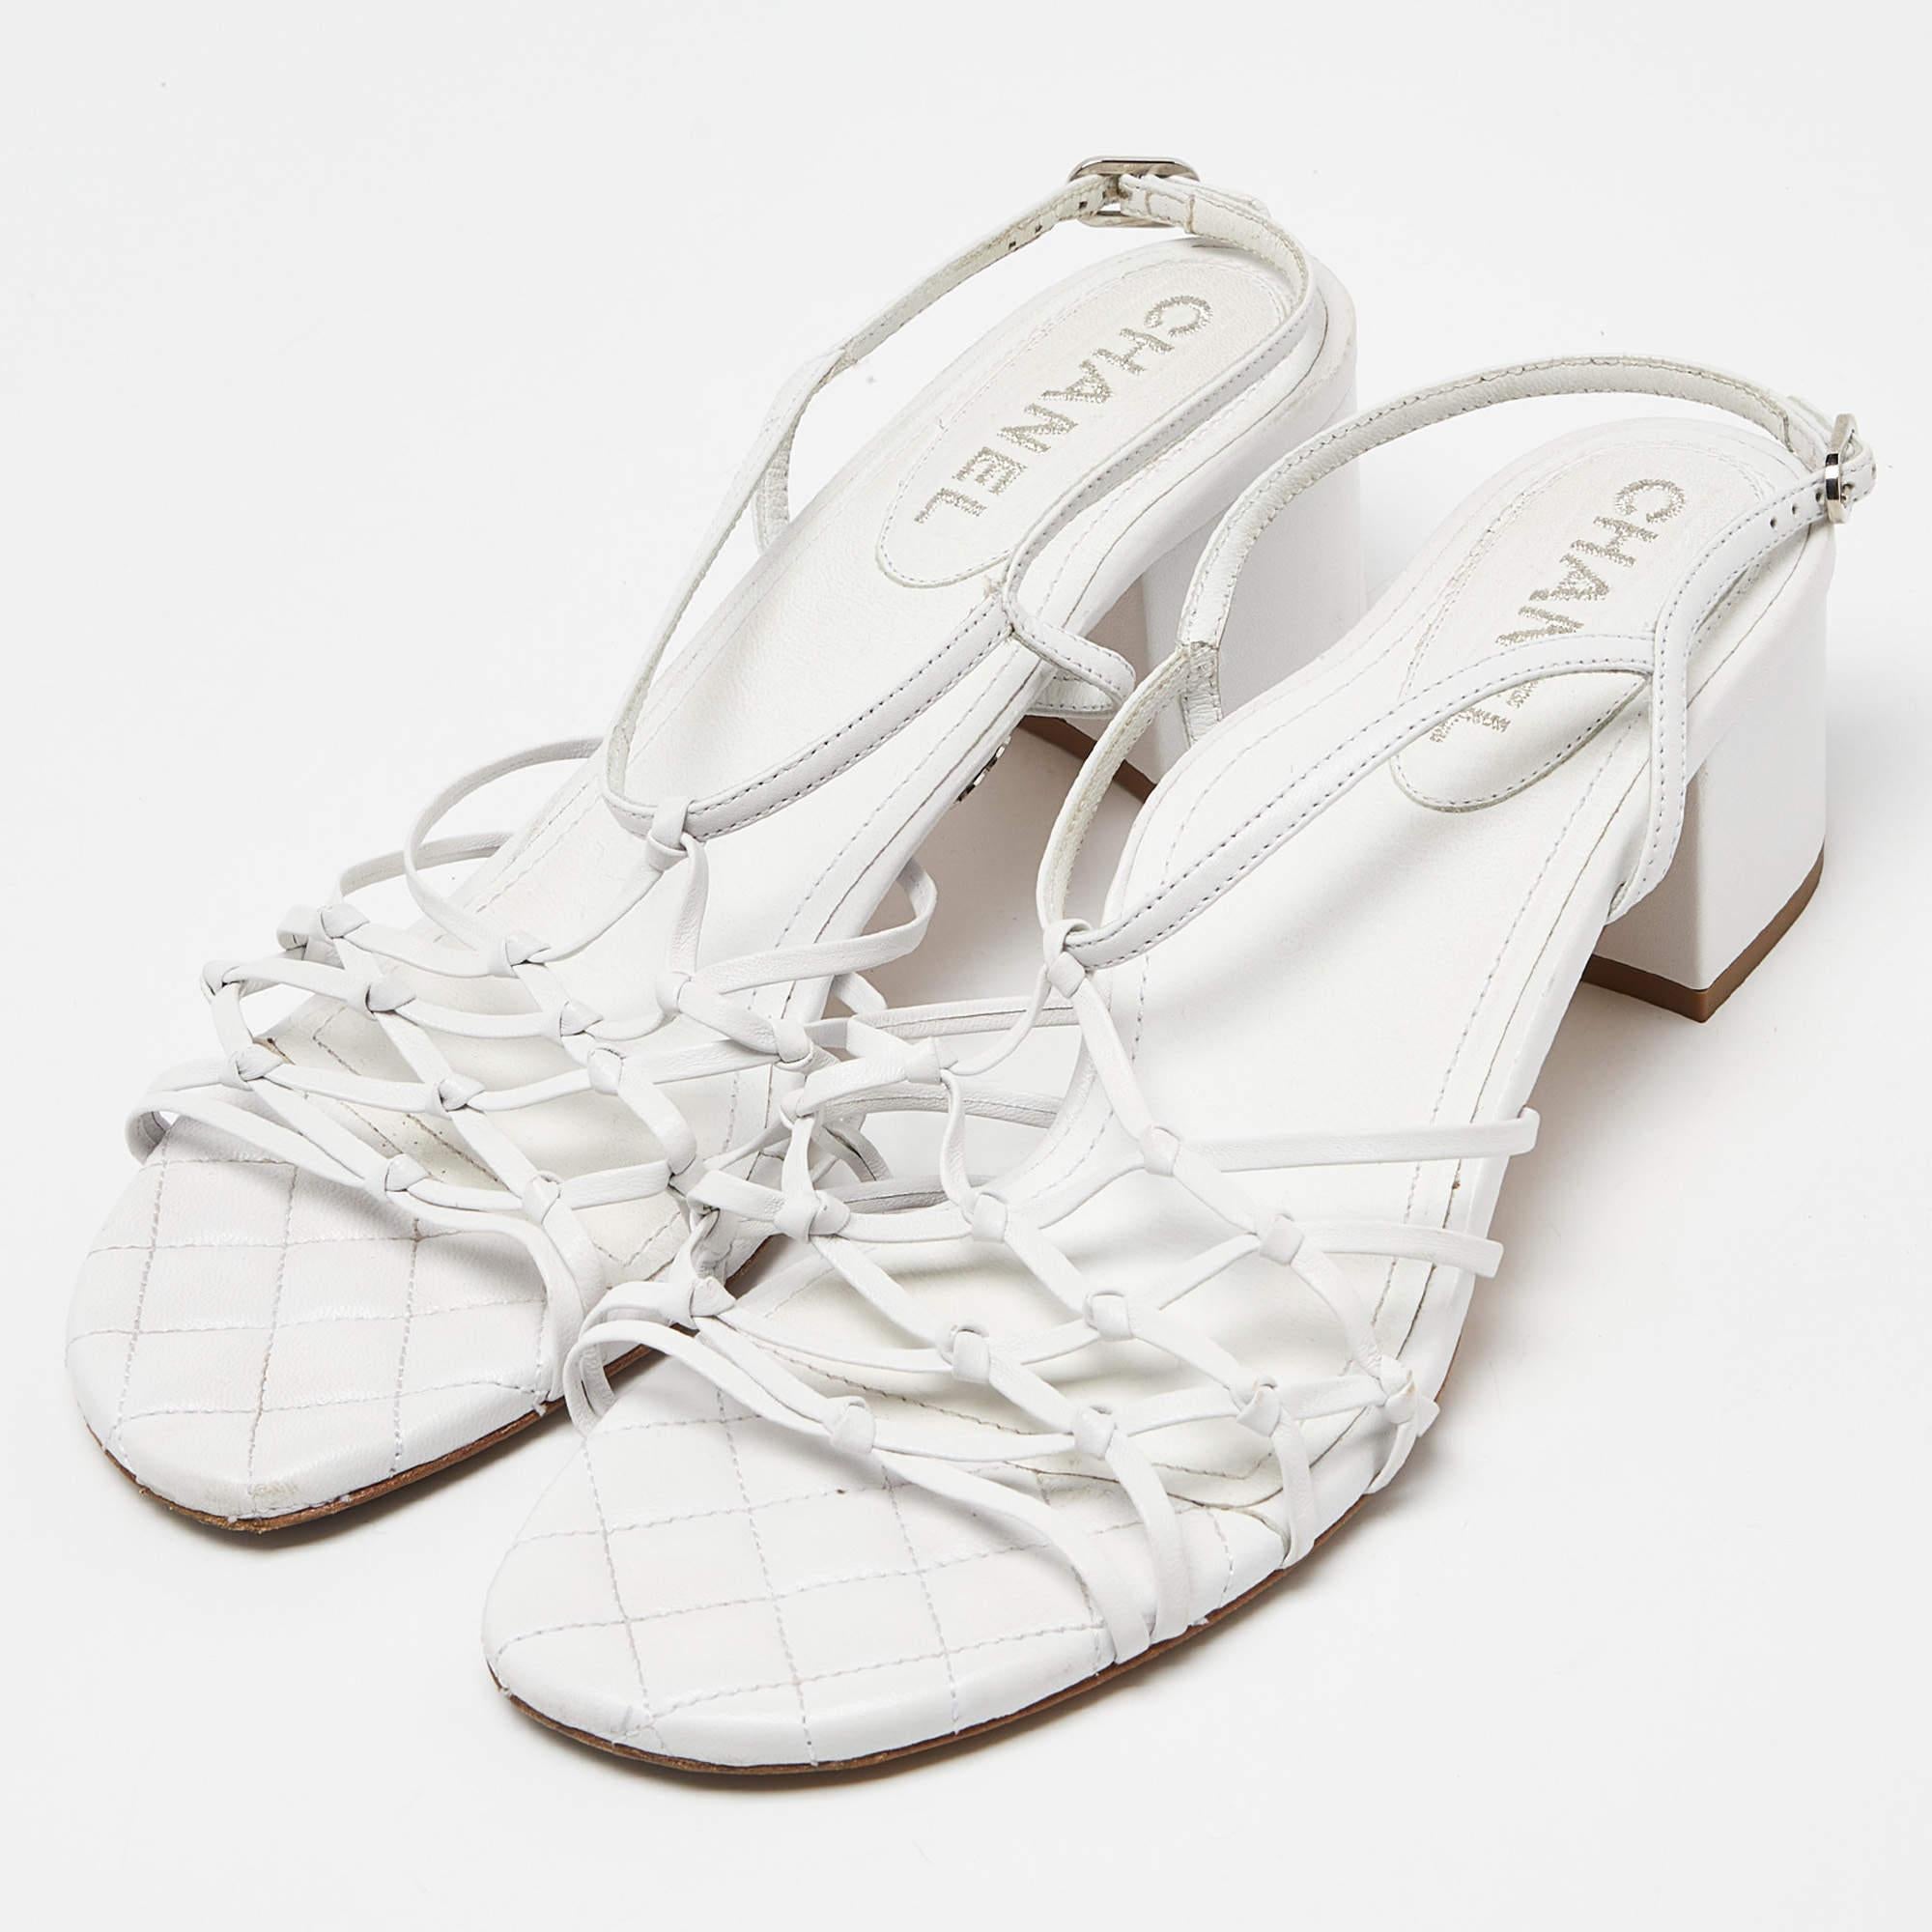 Perfectly sewn and finished to ensure an elegant look and fit, these Chanel white shoes are a purchase you'll love flaunting. They look great on the feet.

